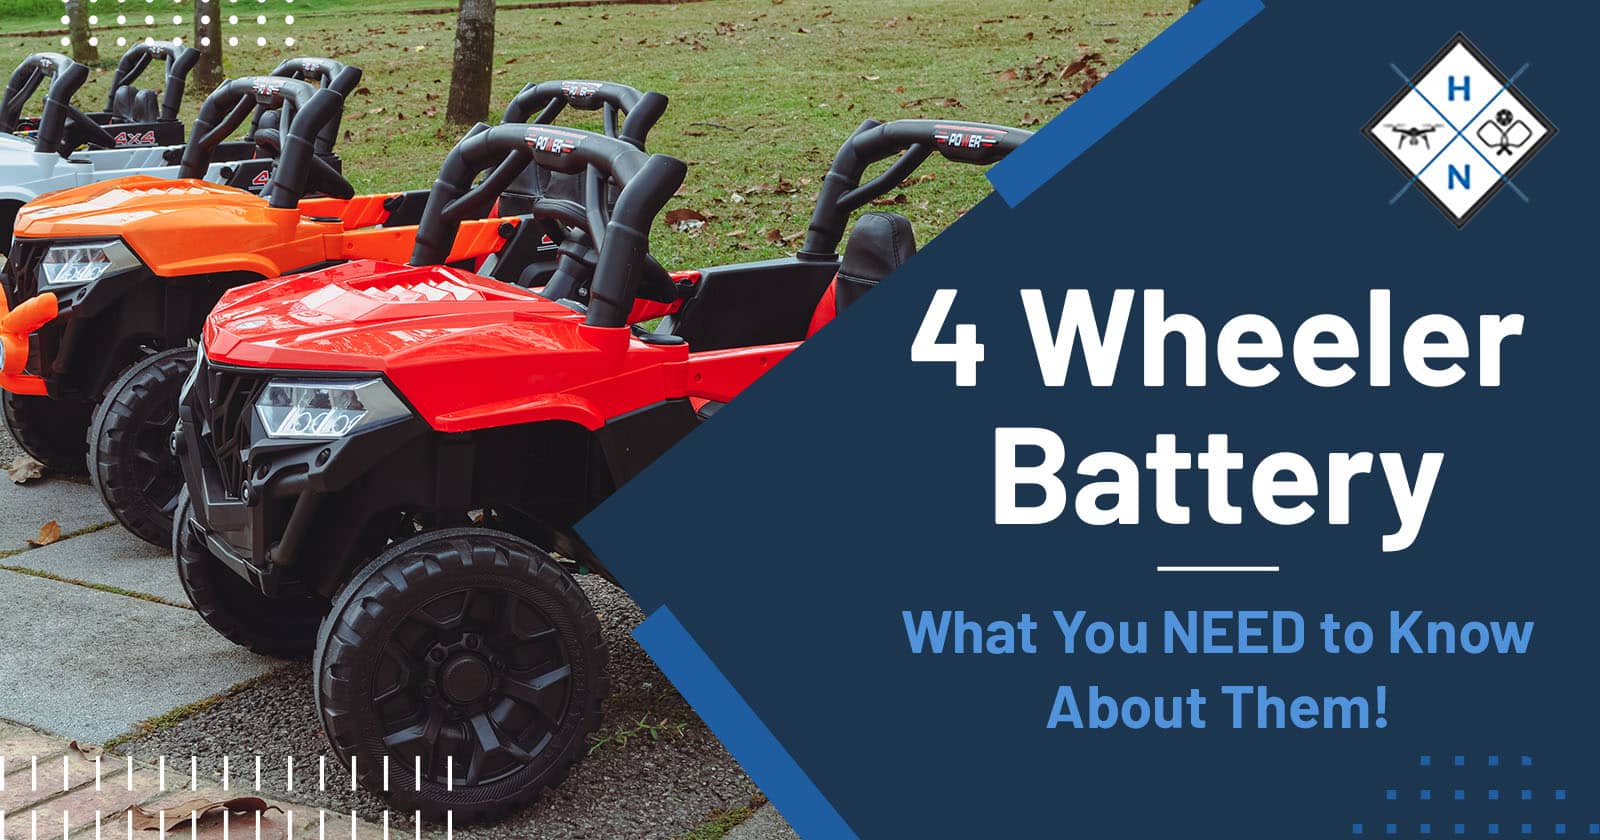 4 Wheeler Battery – What You NEED to Know About Them!